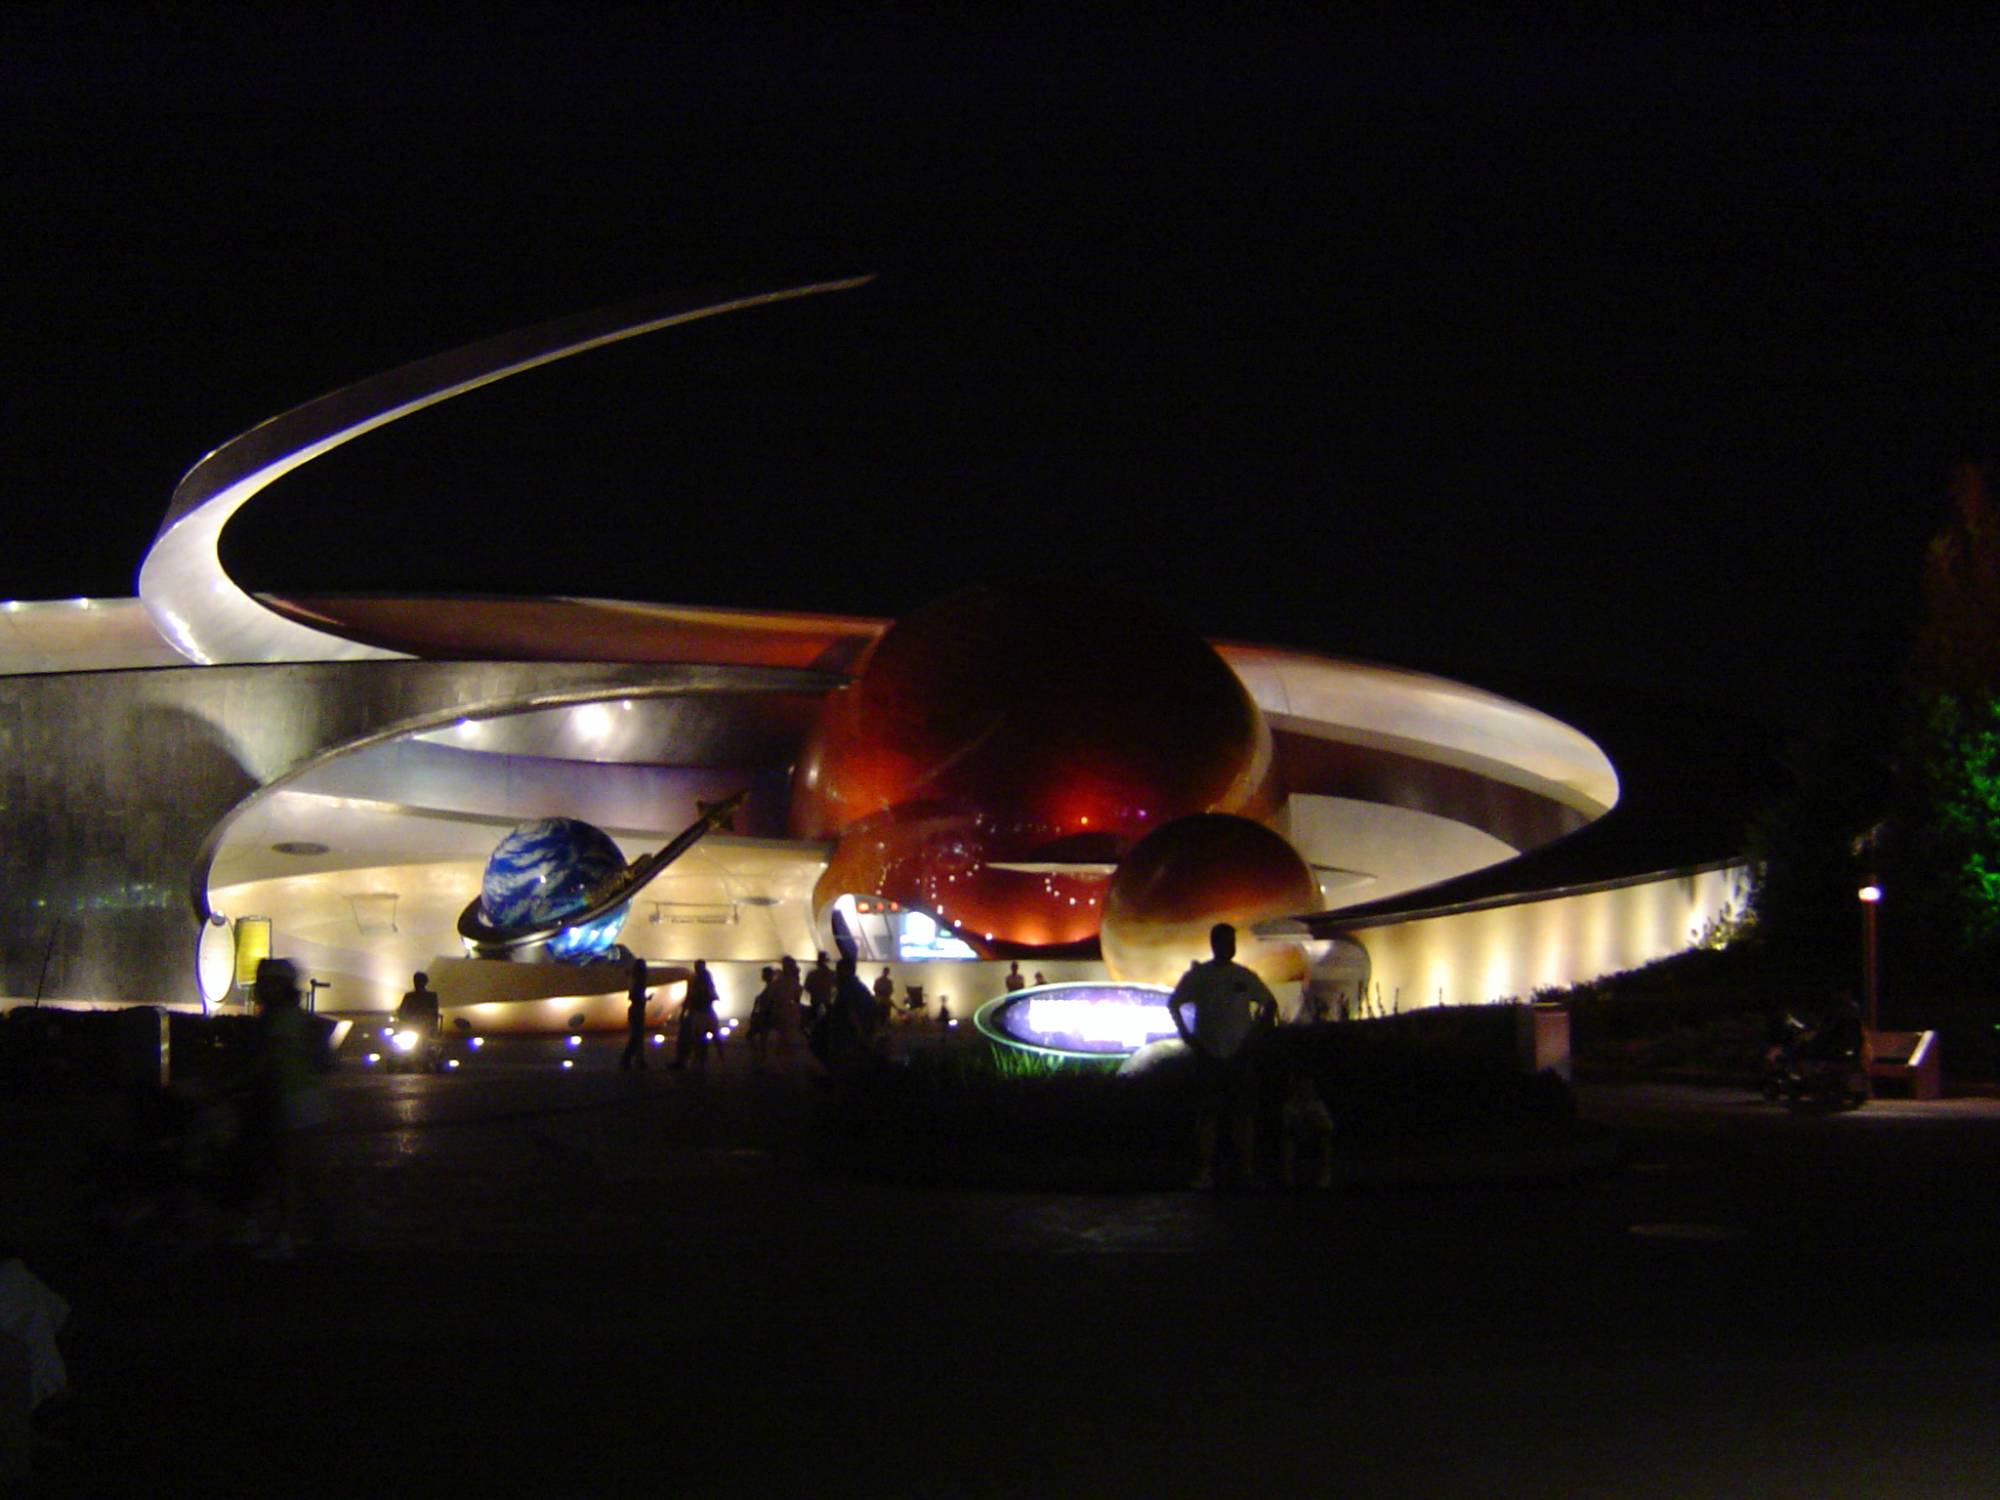 Epcot - Mission Space